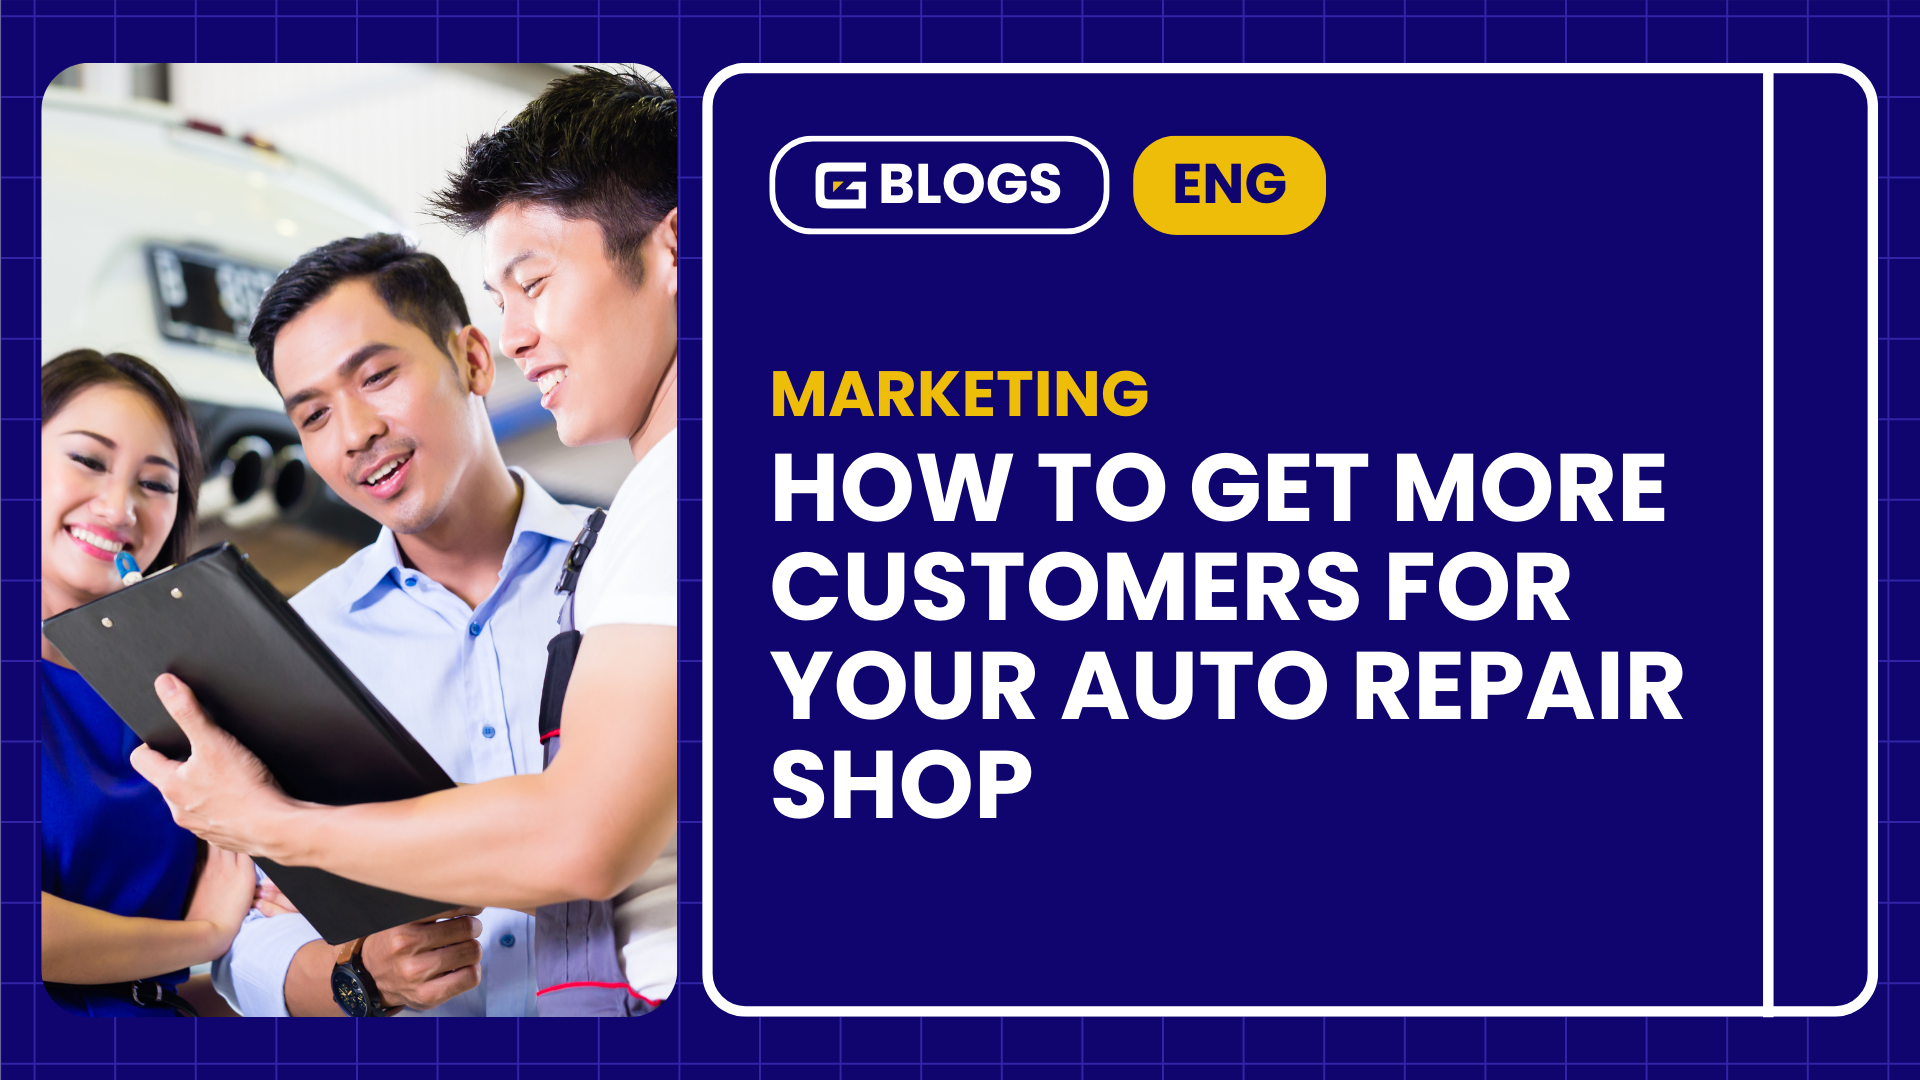 How To Get More Customers for Your Auto Repair Shop